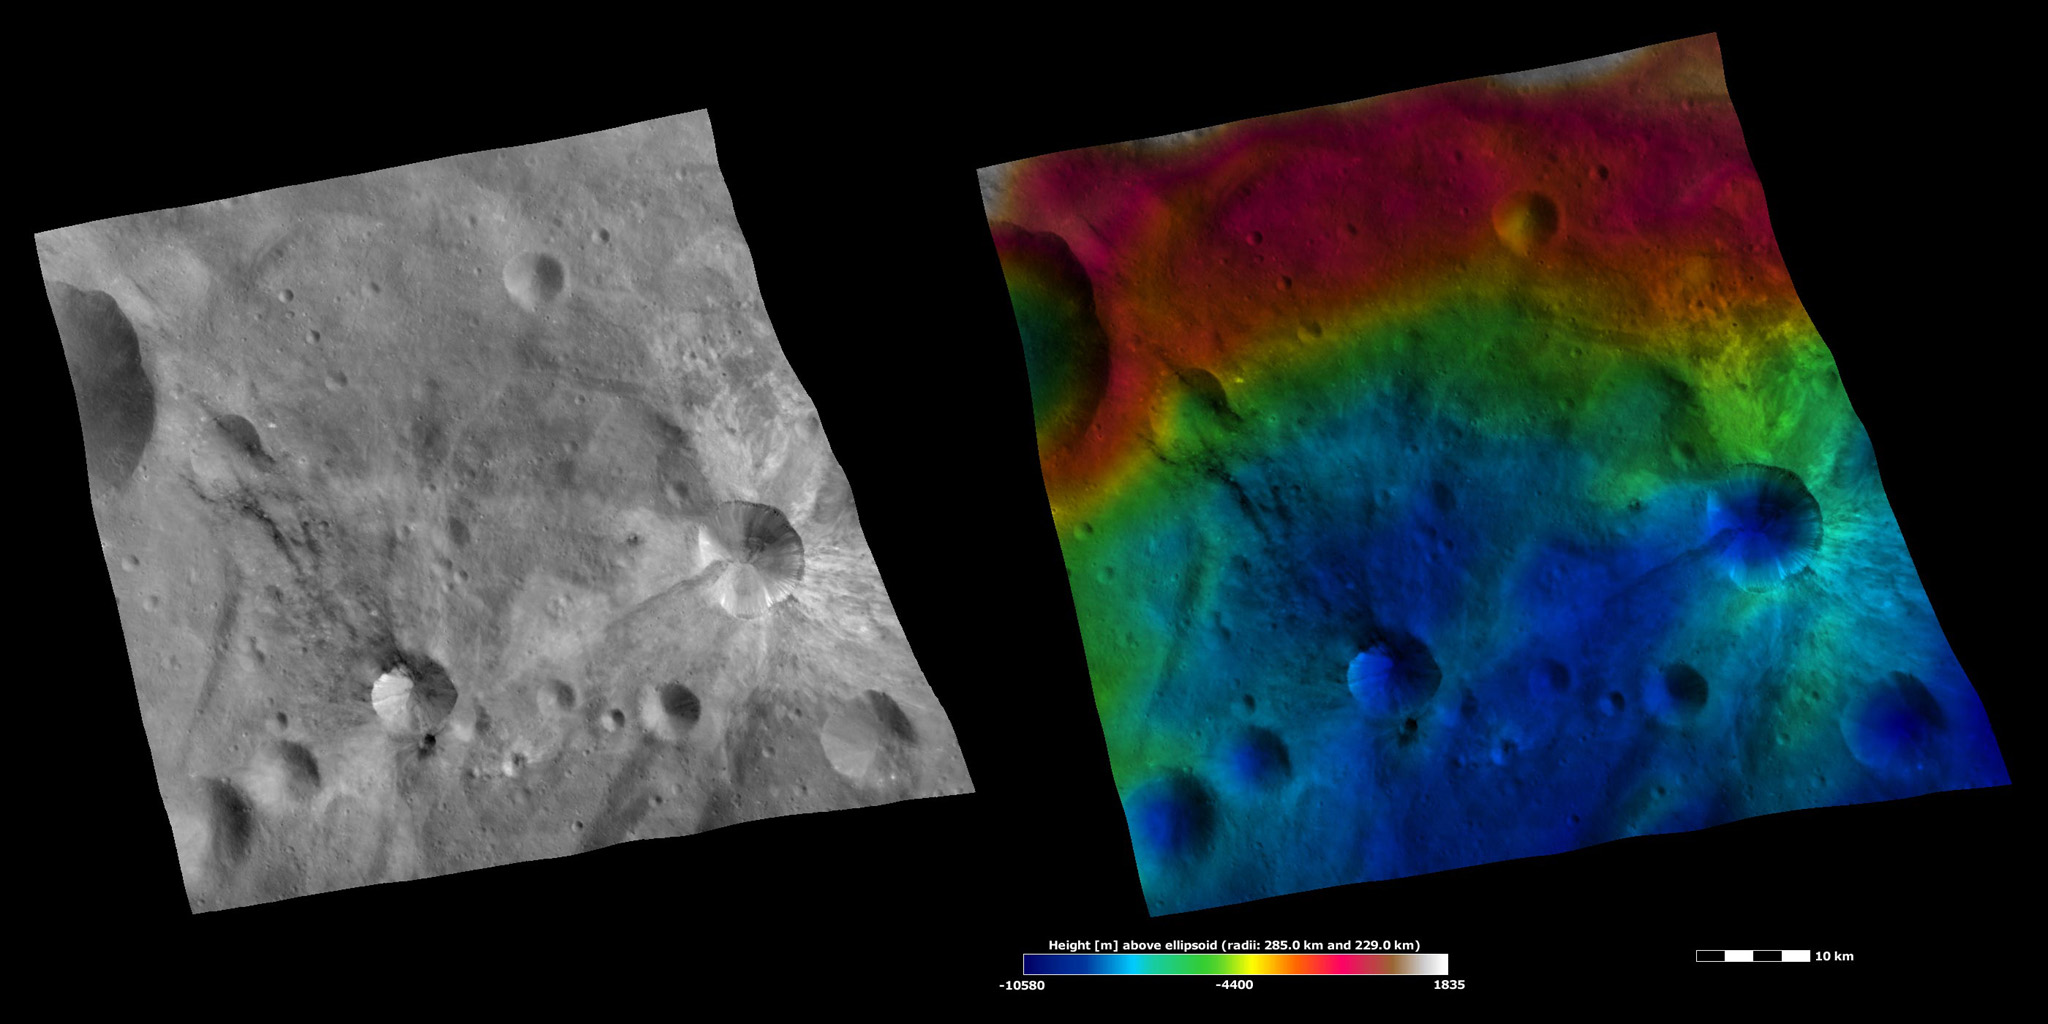 Apparent Brightness and Topography Images of Sossia and Canuleia Craters